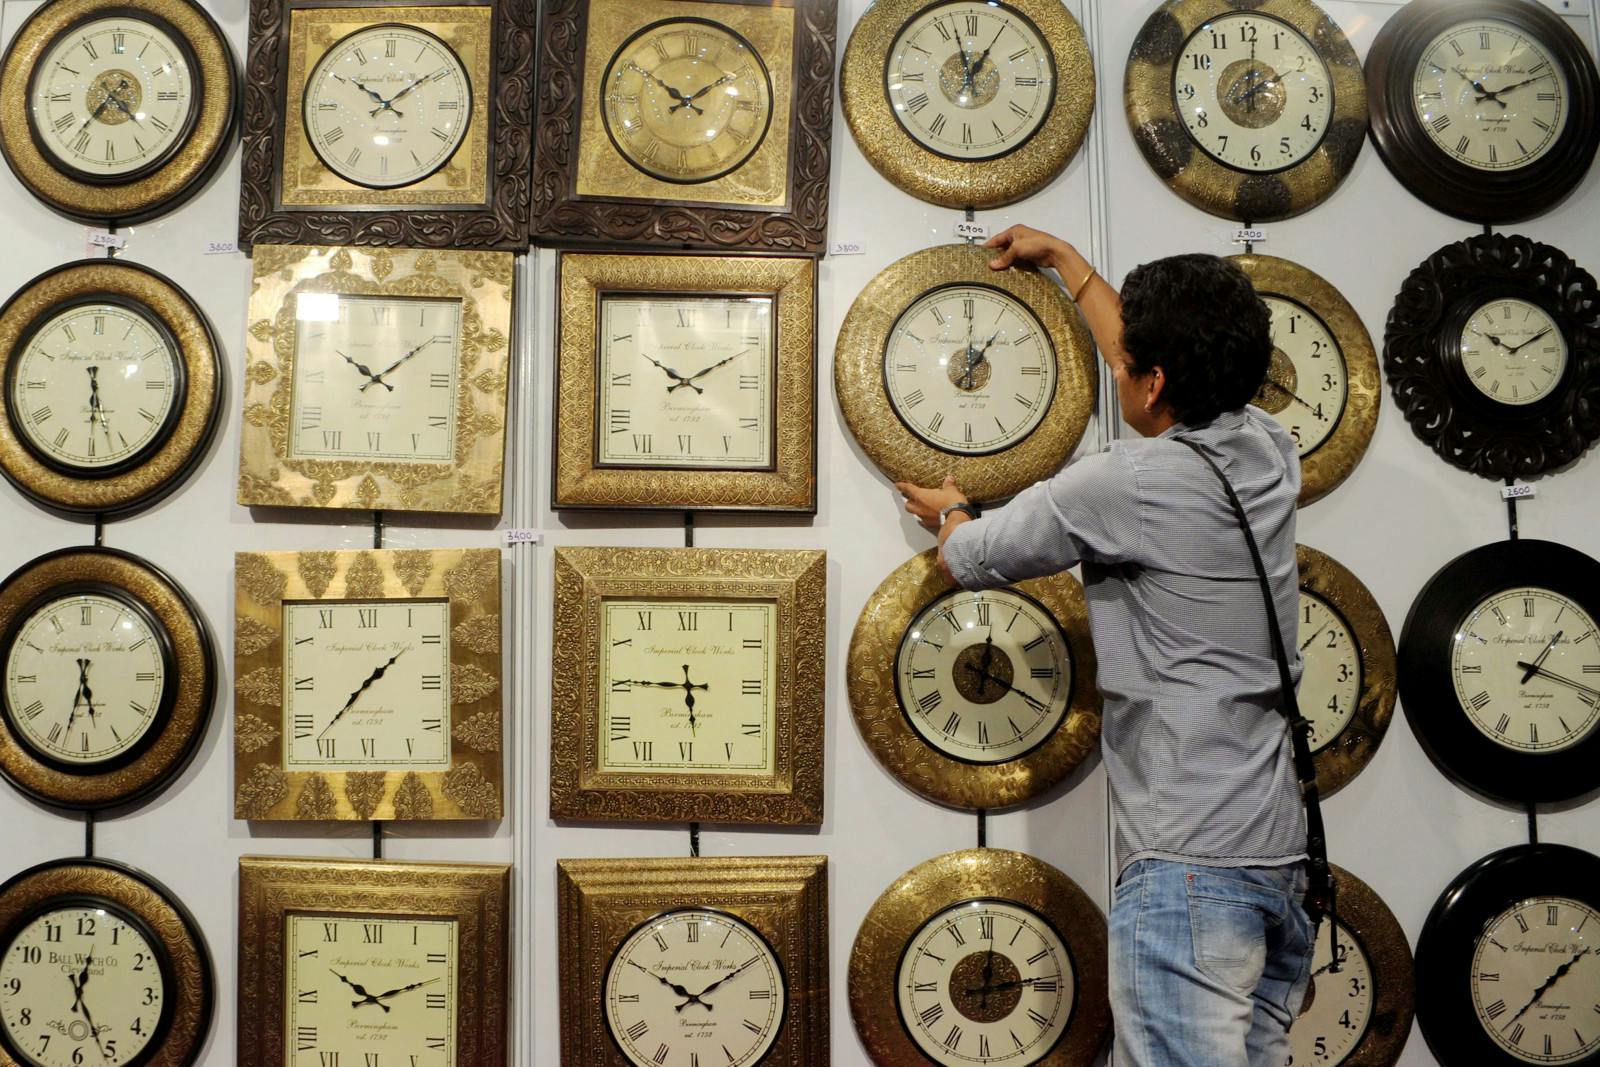 Indian exhibitor Hardik arranges a display of wooden clocks at a stall during an exhibit in Amritsar on September 7, 2012 (NARINDER NANU/AFP/Getty Images)